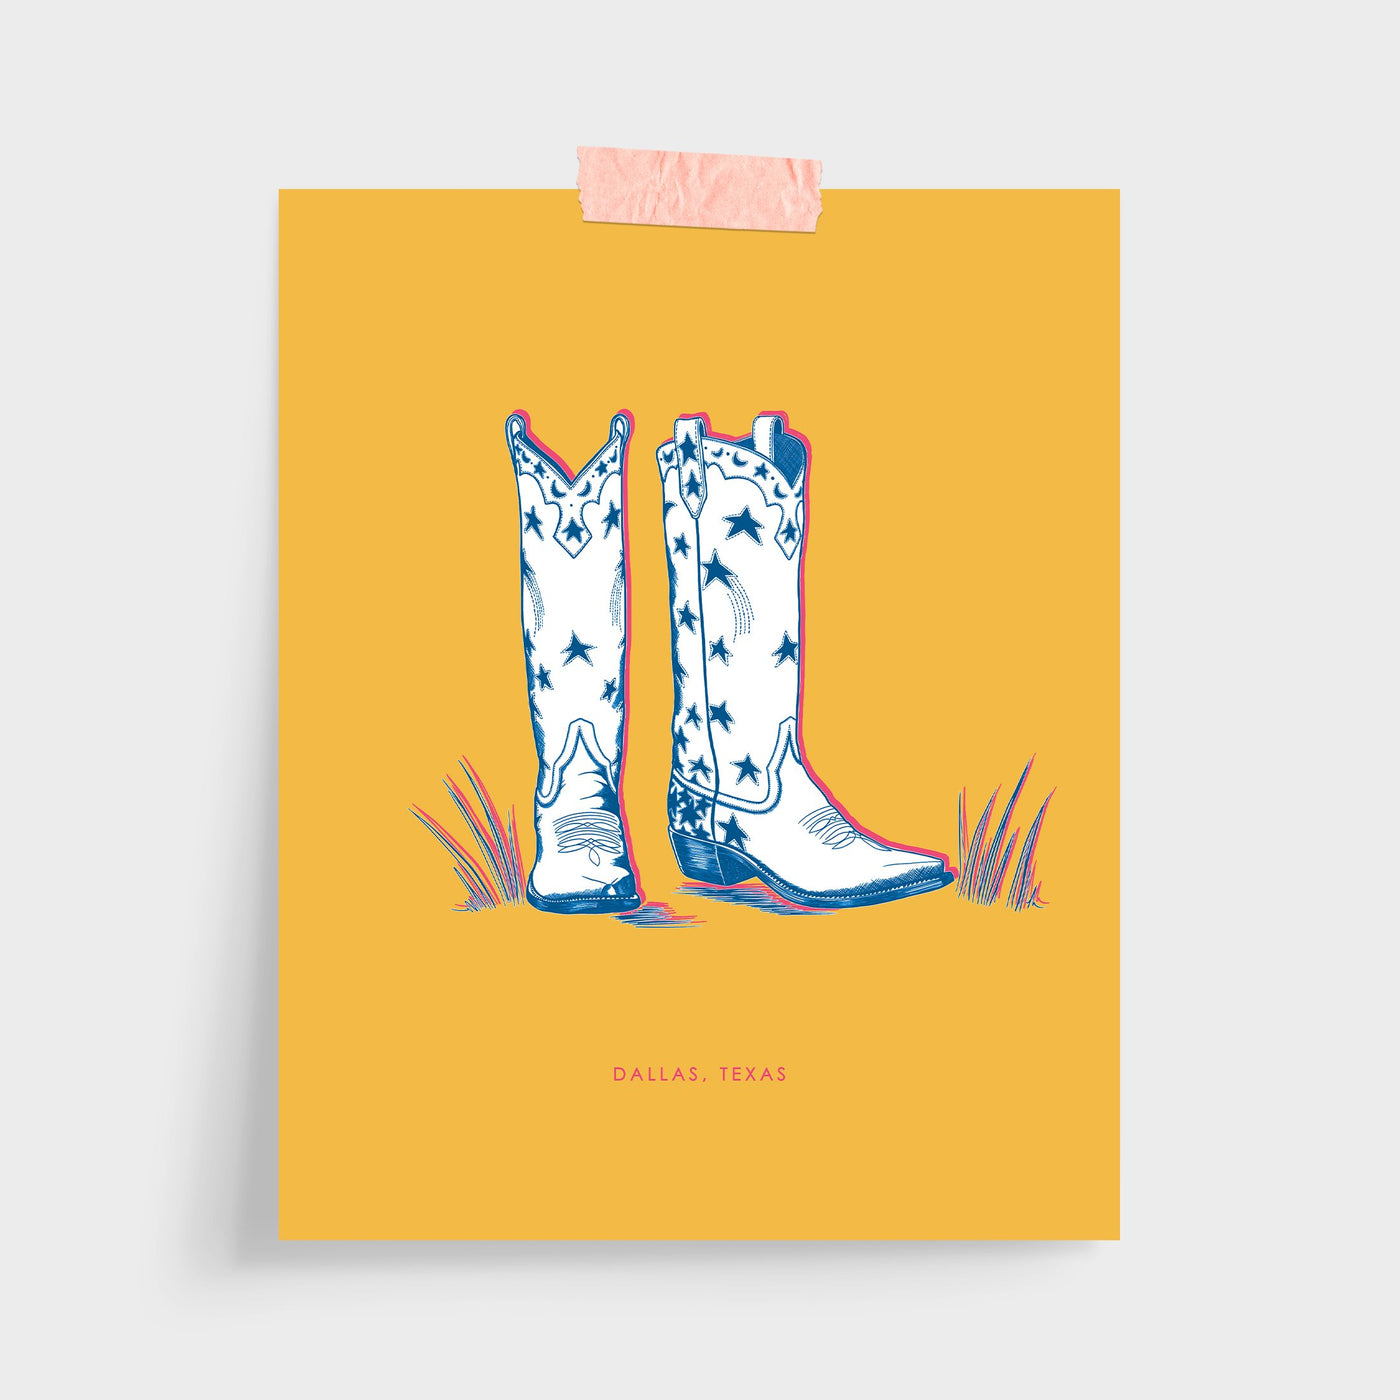 Gallery Prints Yellow / 5x7 / Unframed Dallas Boots Gallery Print Katie Kime